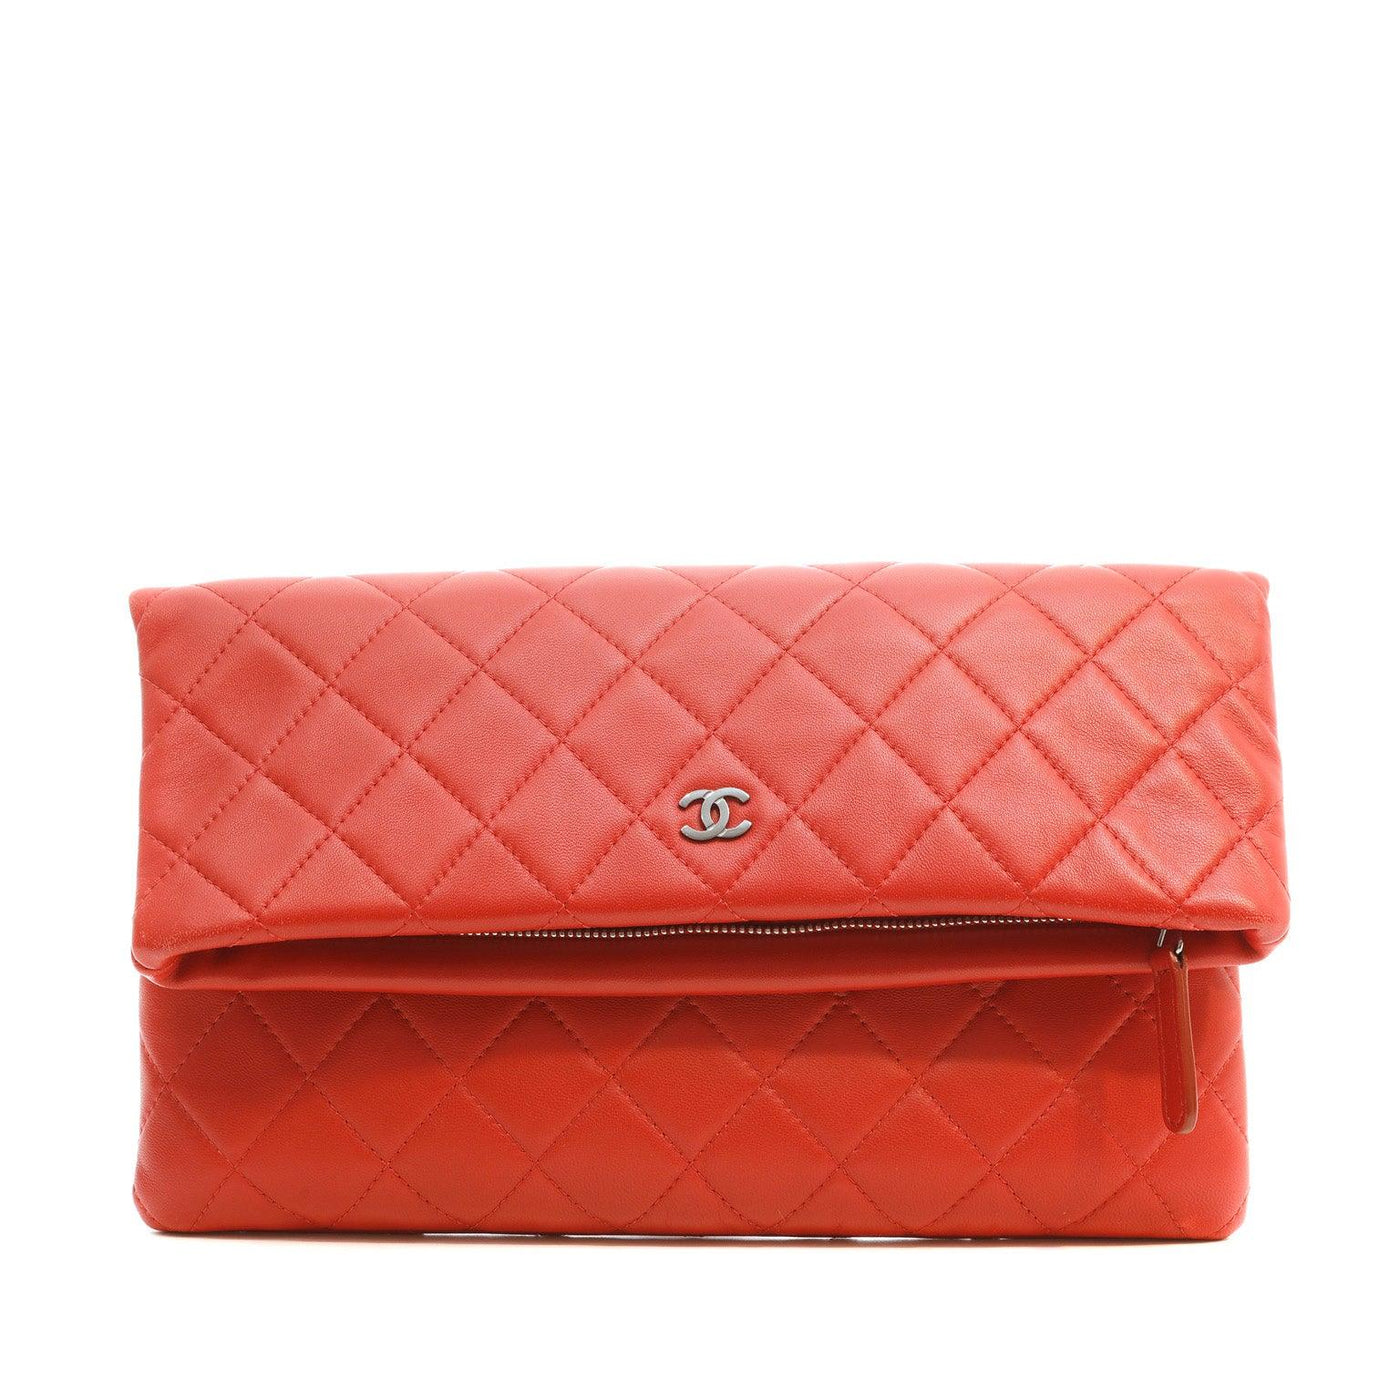 Chanel Red Quilted Lambskin Foldover Clutch - Only Authentics